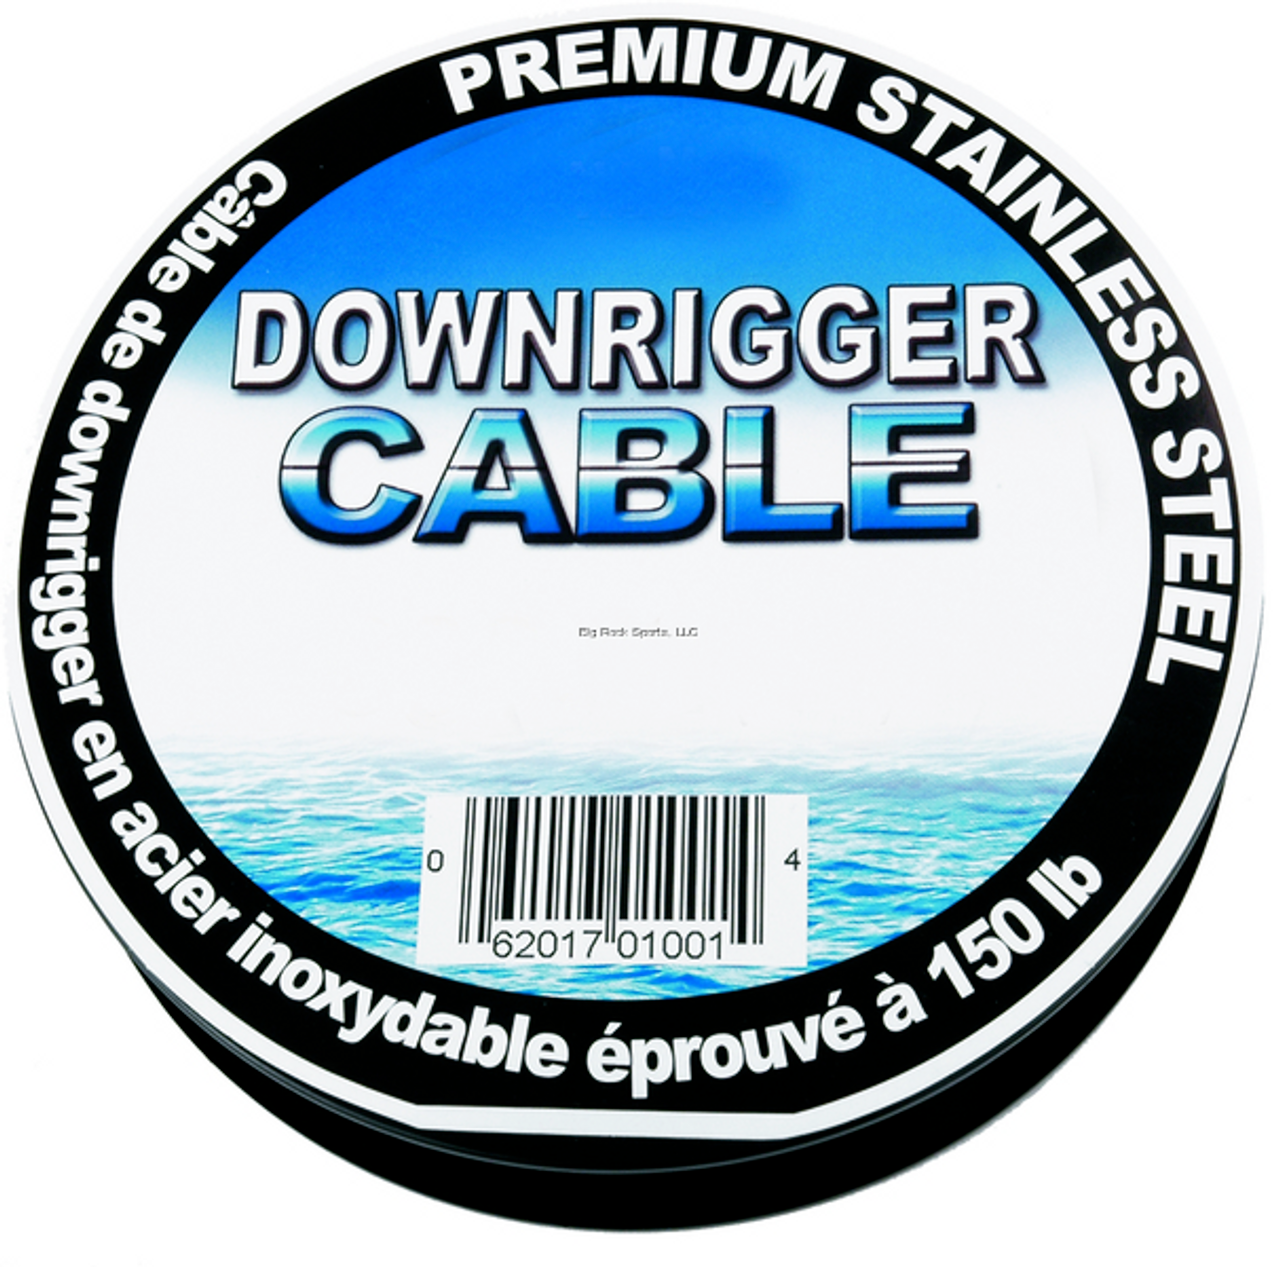 Scotty Premium Stainless Steel Downrigger Cable, 150lb Test, 200 ft spool with kit